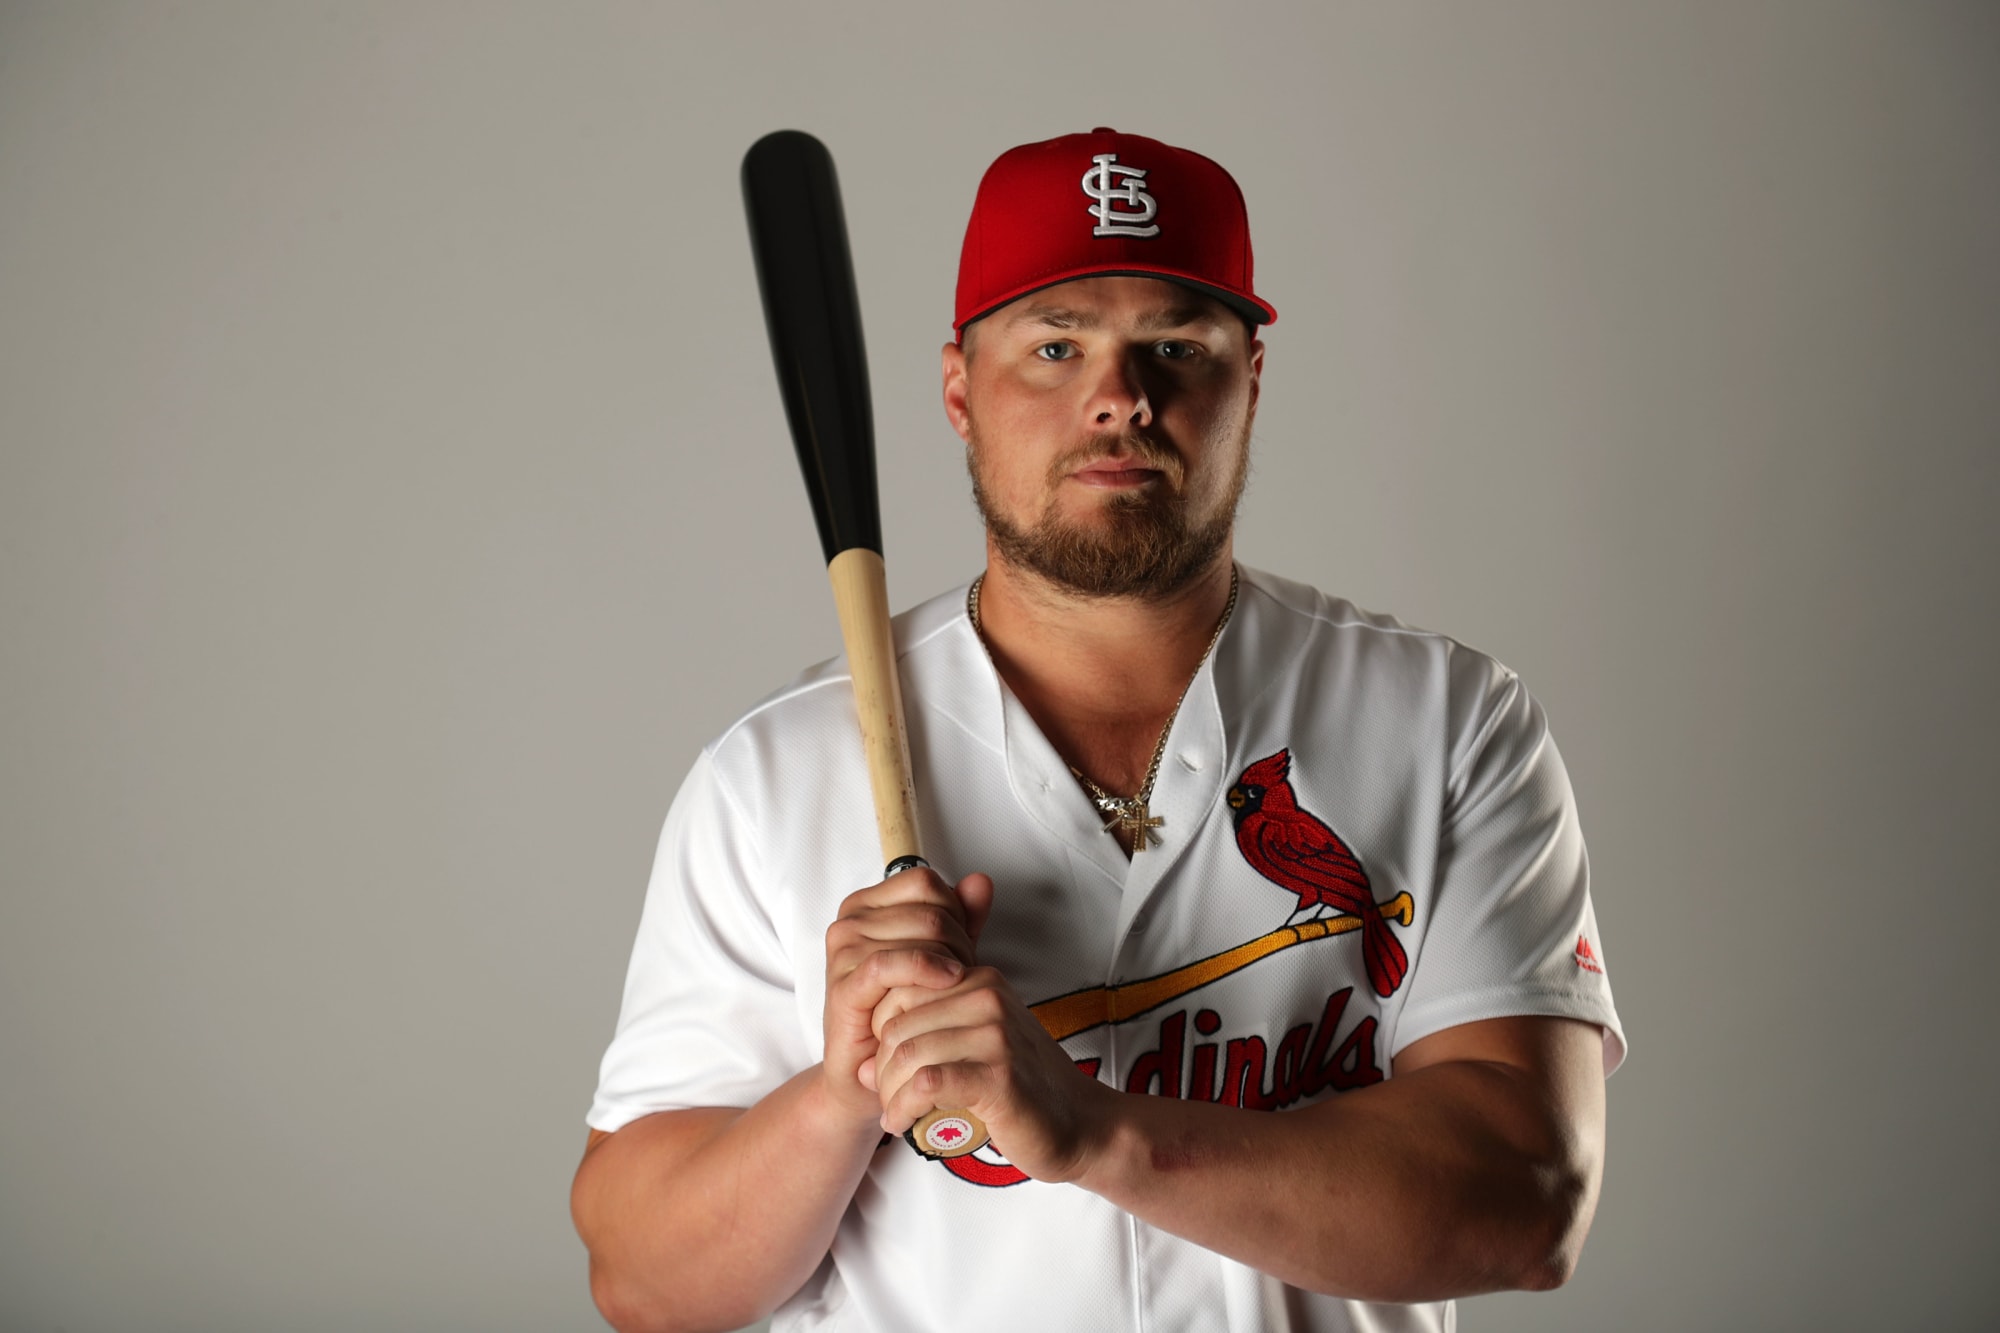 St. Louis Cardinals Luke Voit making the most of his opportunity